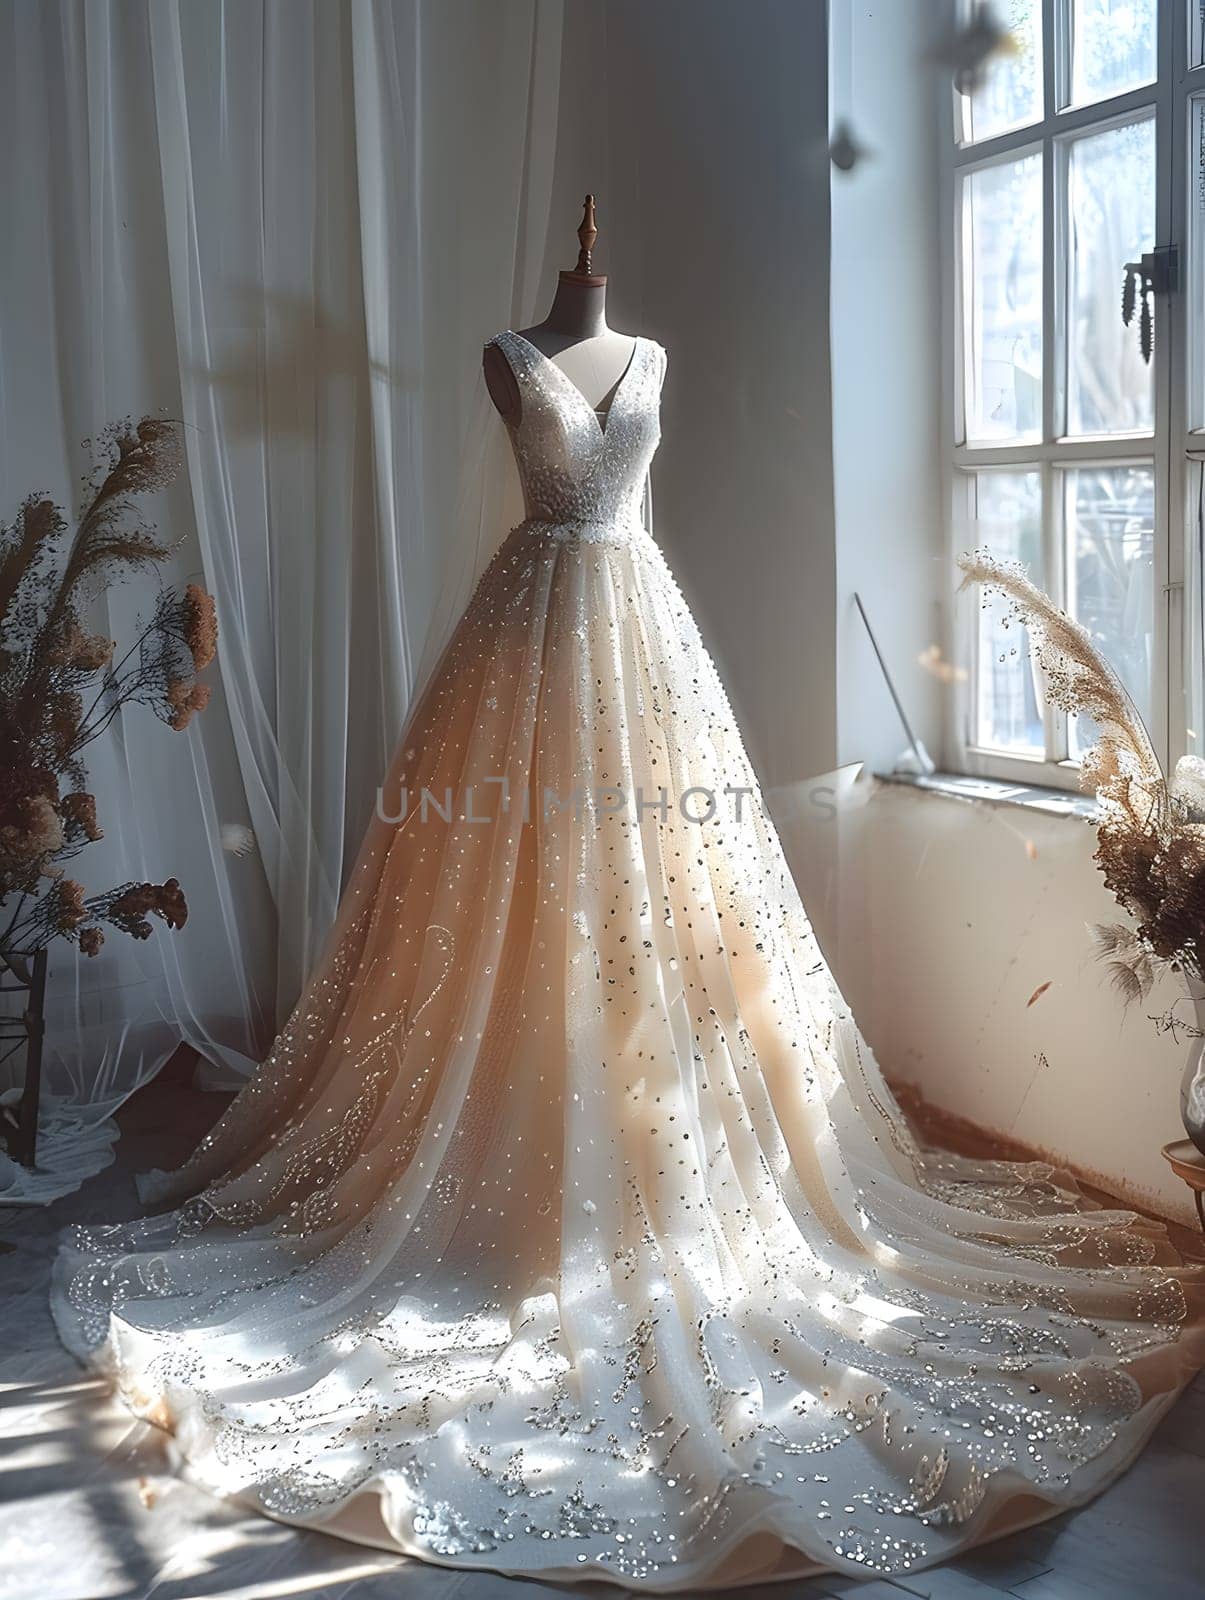 A stunning wedding gown is elegantly displayed on a mannequin by a window, showcasing intricate fashion design. The wood flooring complements the bridal accessory beautifully